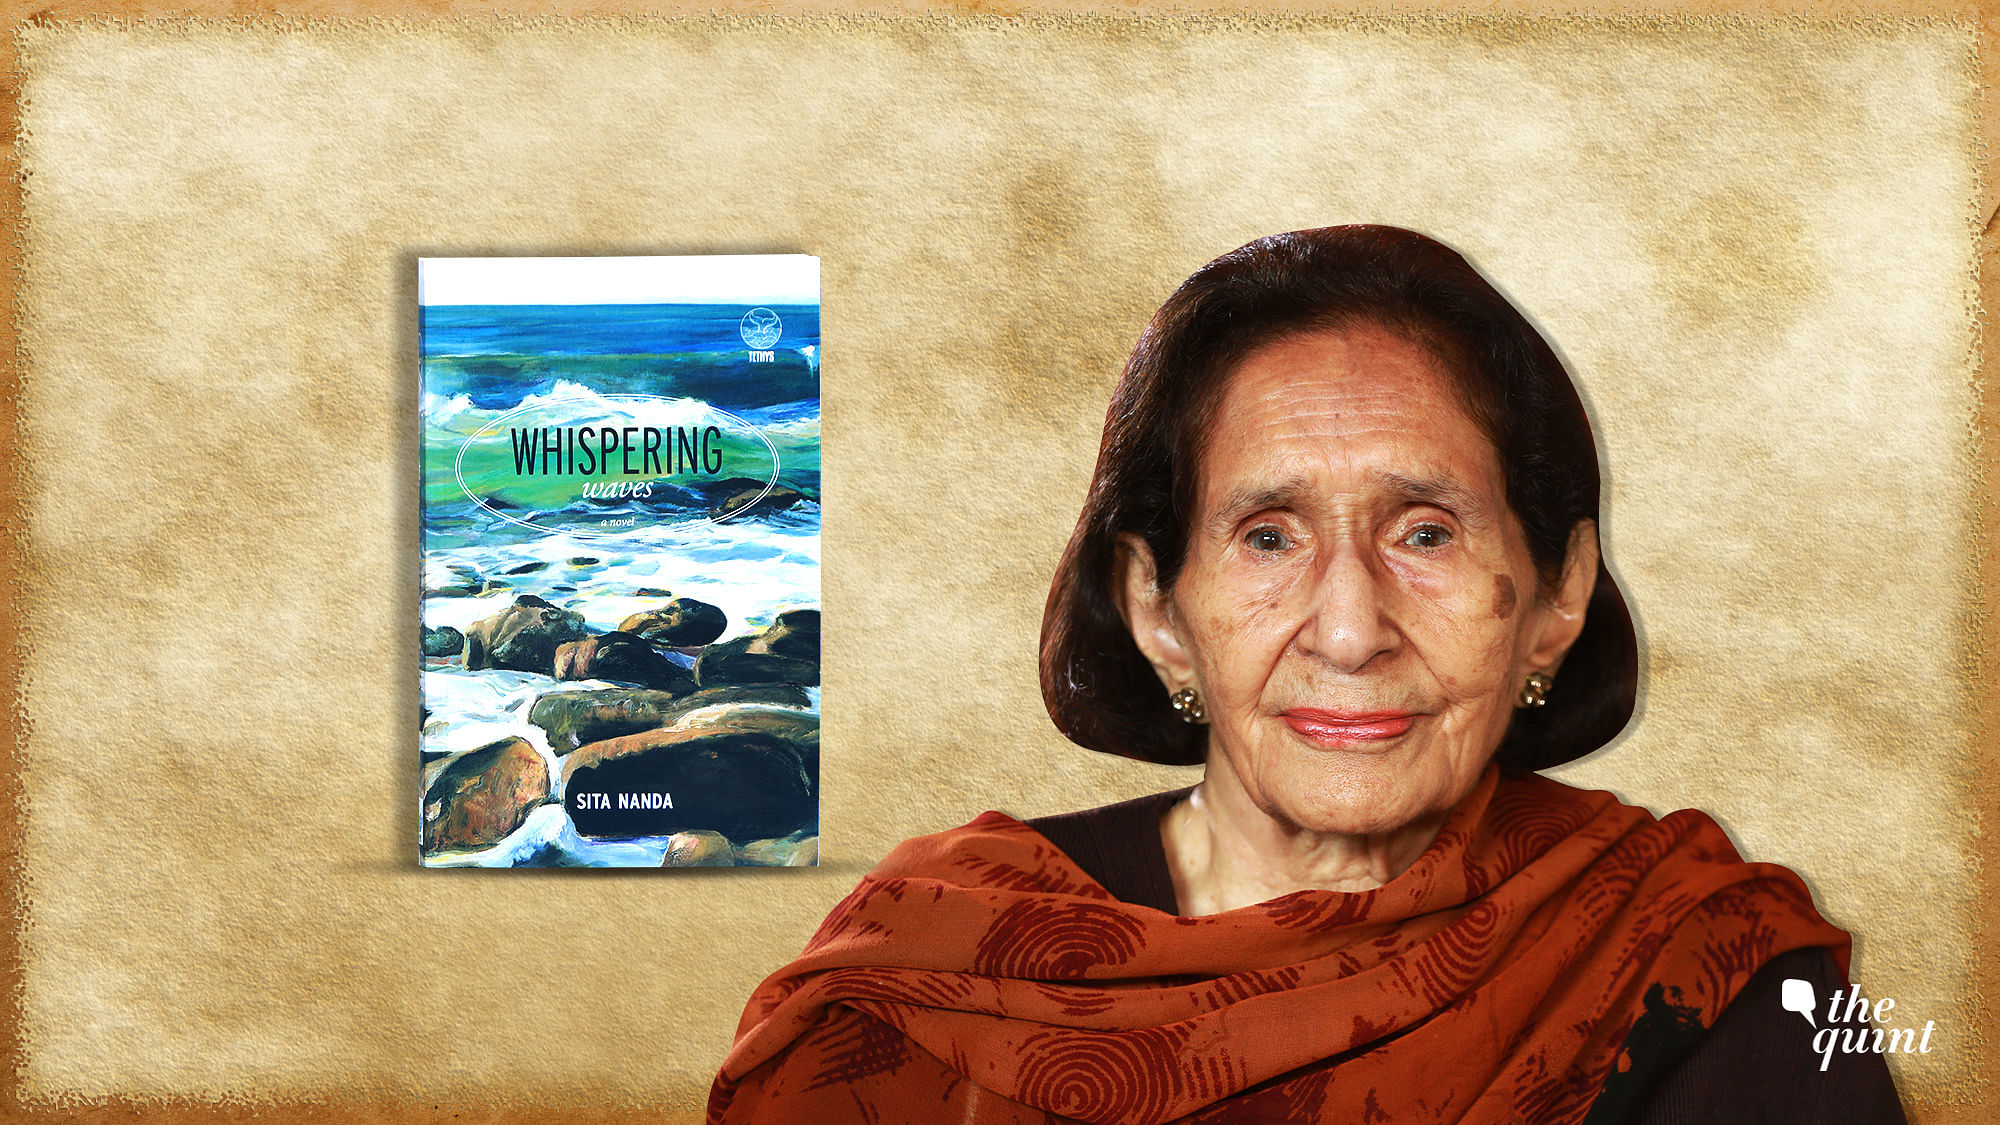 88-year-old Sita Nanda is the proud author of her novel which was written 55 years ago, but has just been published.